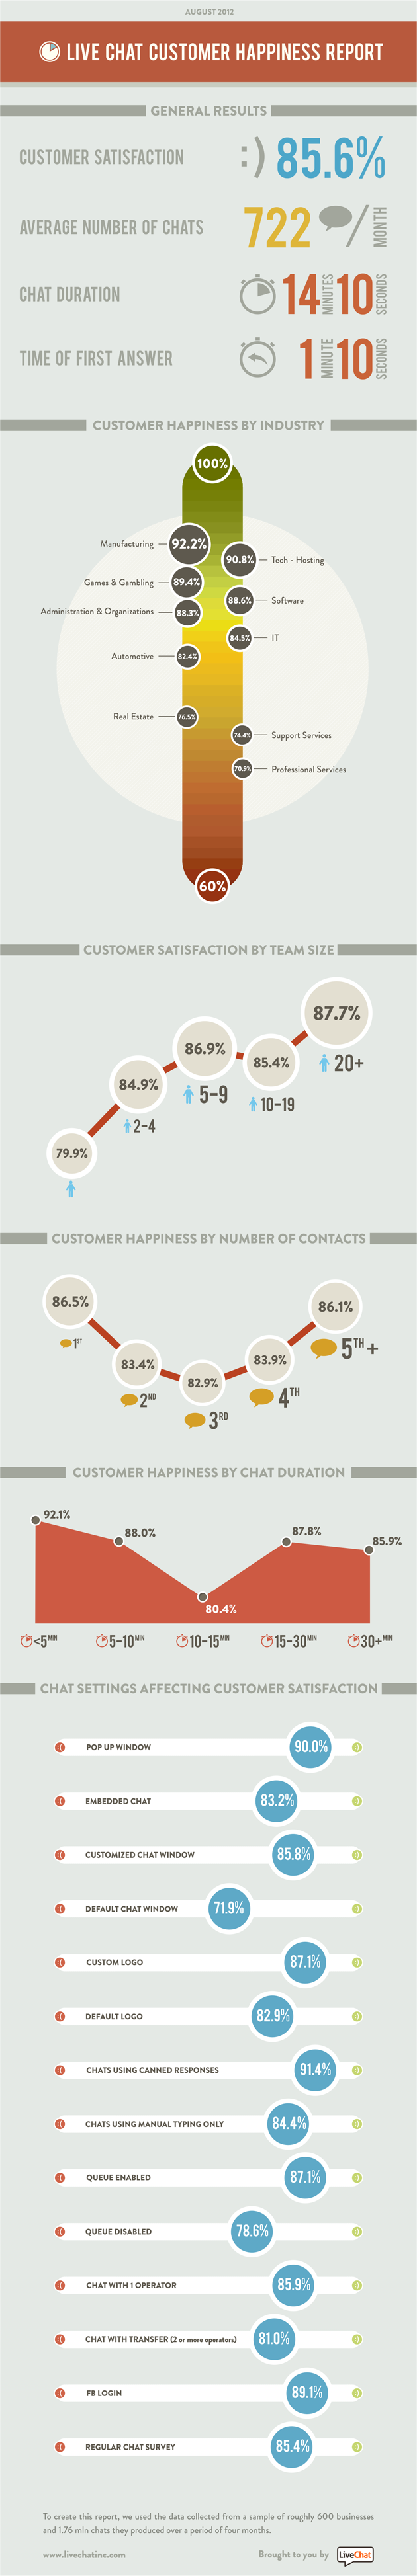 customer_happiness_report_infographic_by_LiveChat